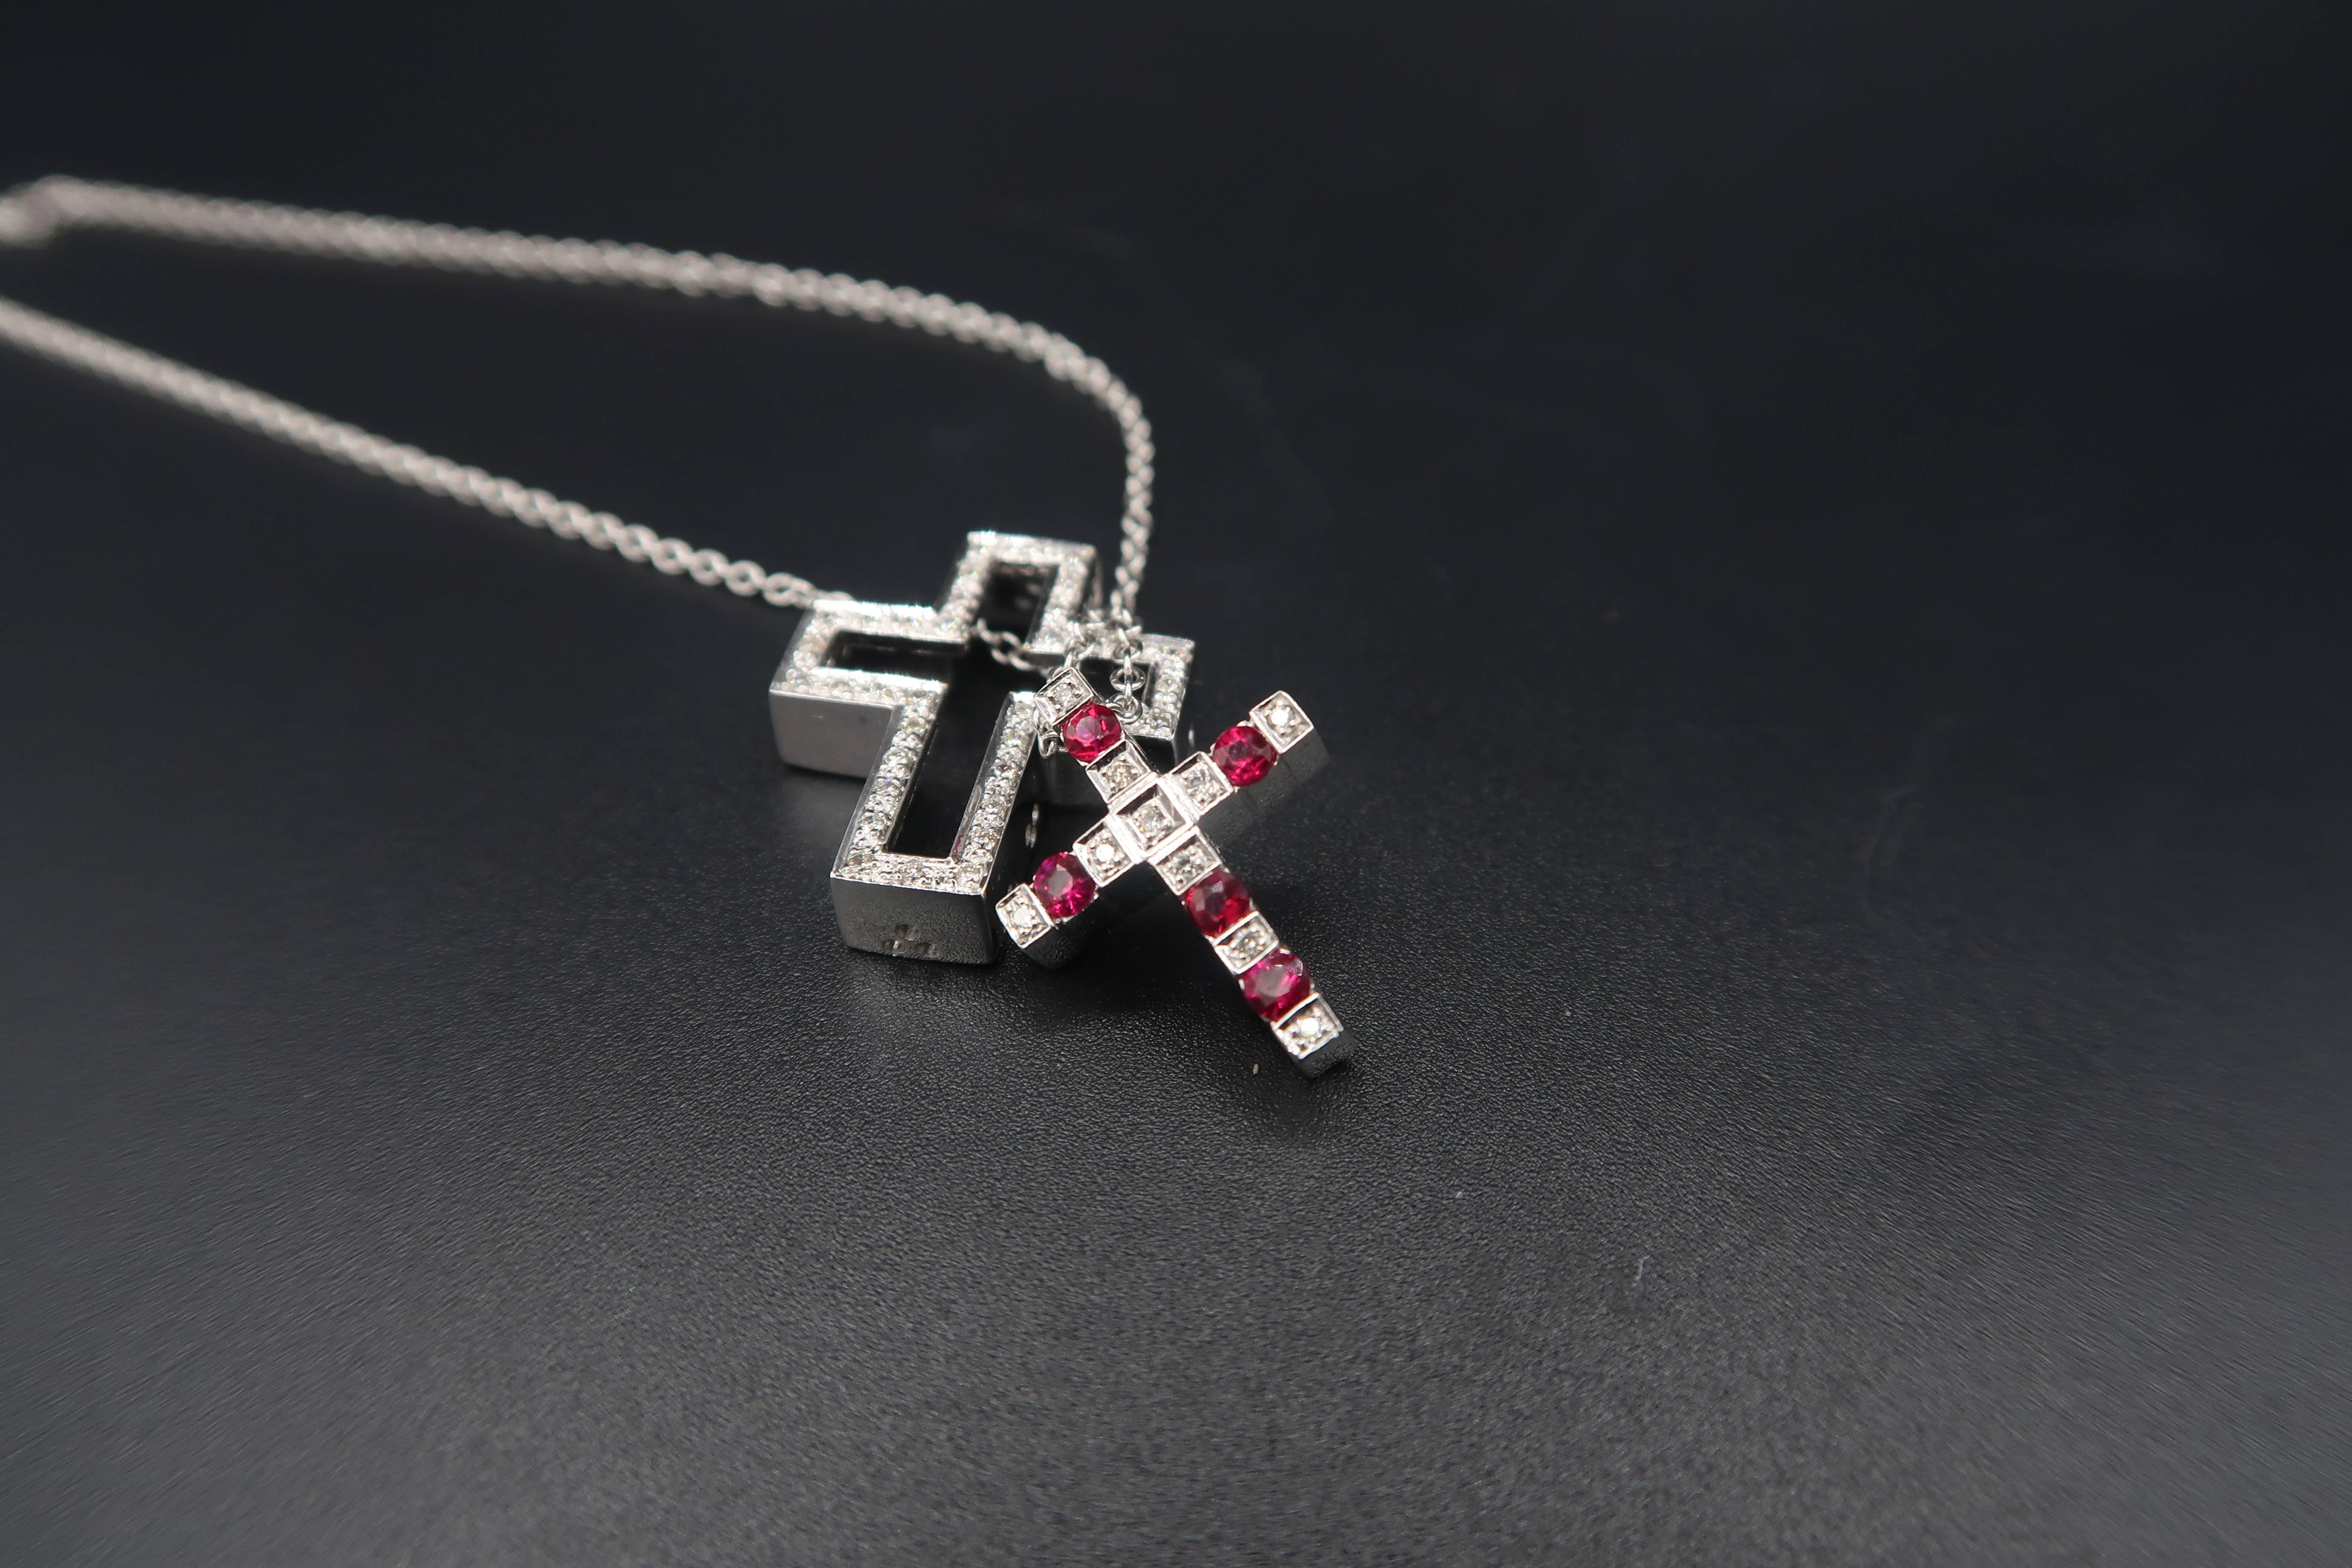 Modern cross pendants that can be combined into one breathtaking cross pendant. Can be worn 3 different ways. Come with a plain 18K white gold chain.

2 Splittable Joinable Cross Pendants
Gold : 8.668g. 18K White Gold
Ruby: 0.50ct.
Diamond : 0.58ct.